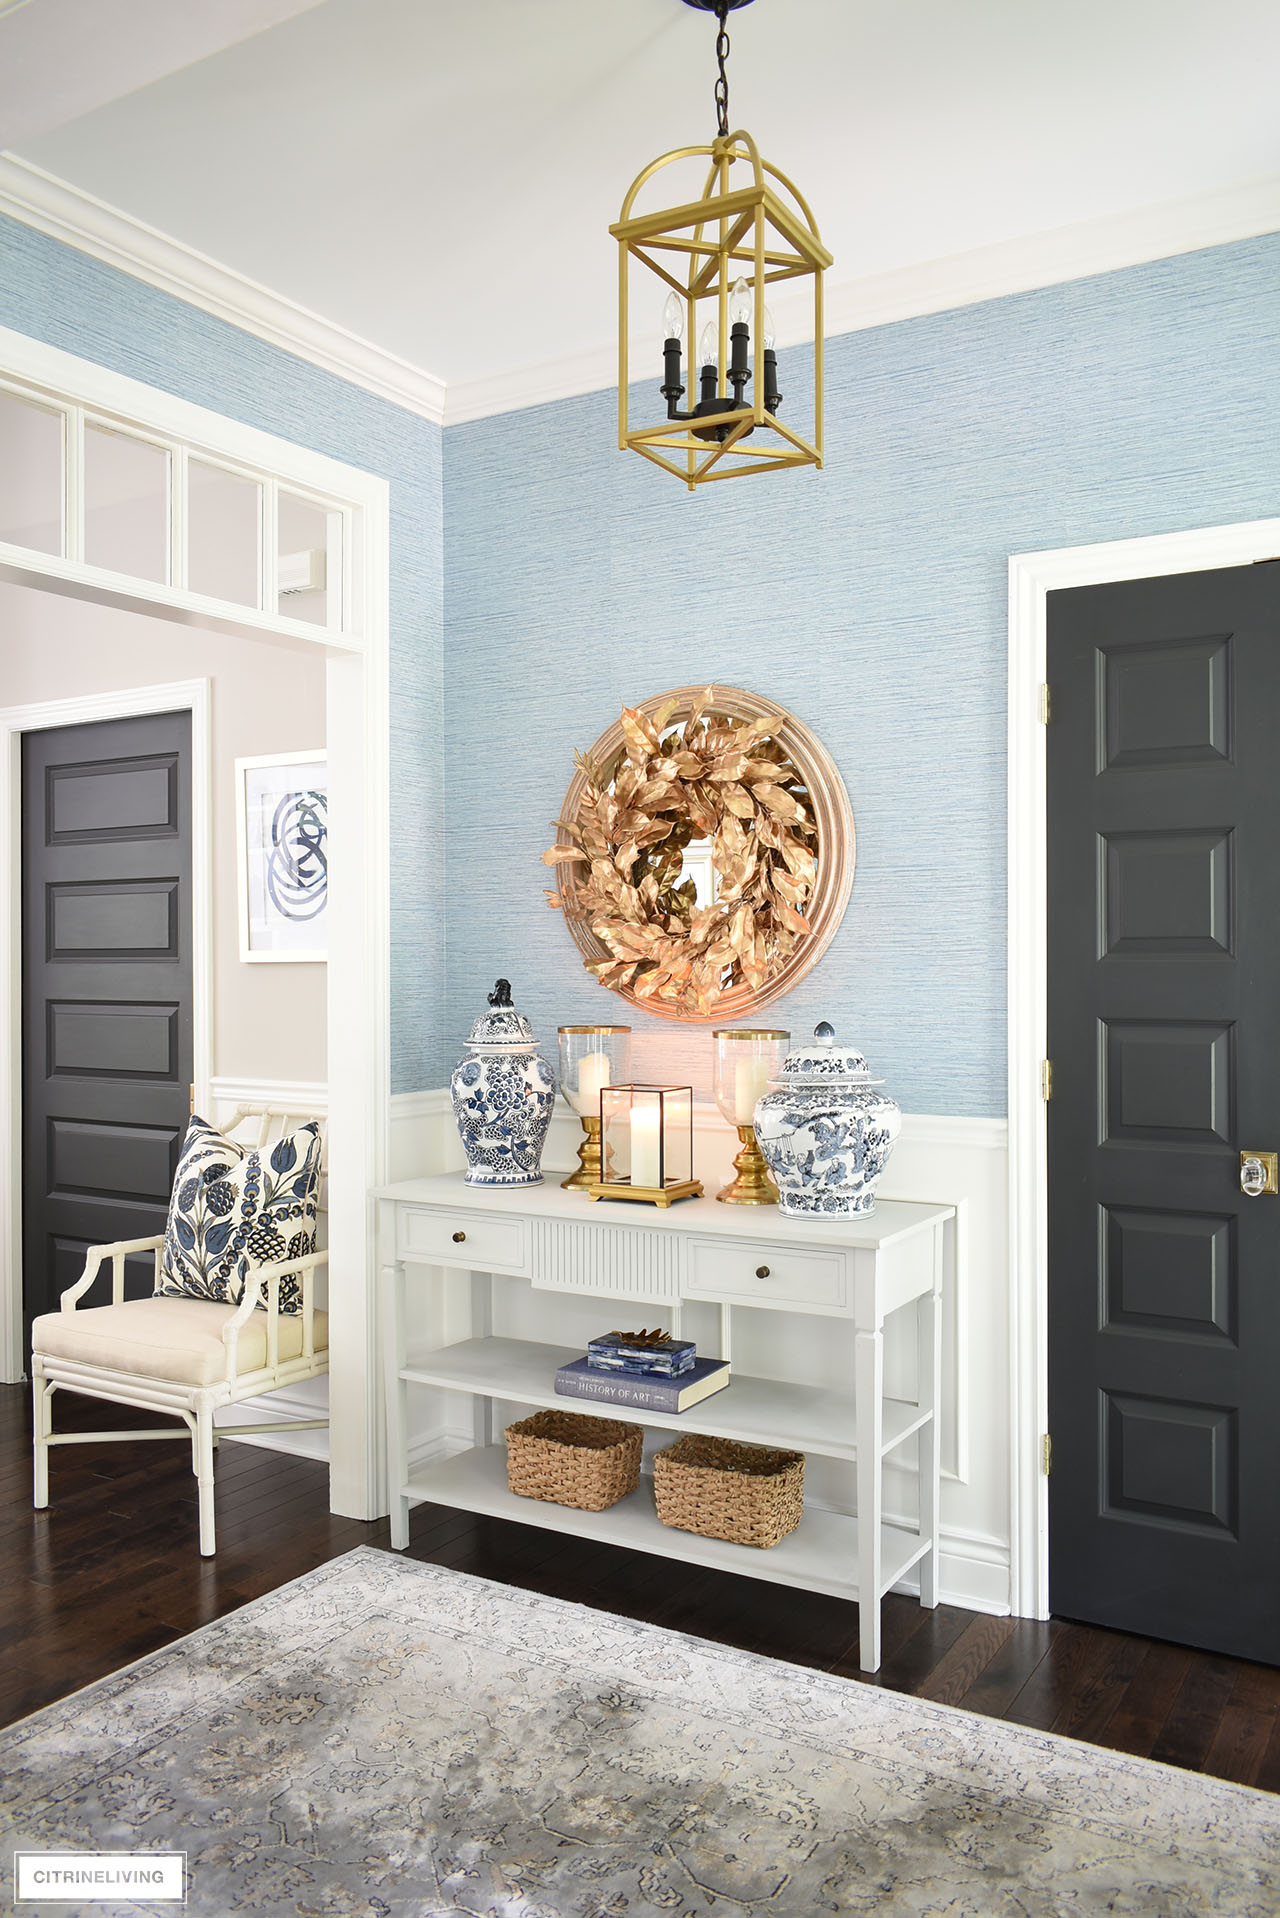 Fall entryway table decorated with a gorgeous gold wreath, blue and white ginger jars, gold candleholders, baskets, boxes and books creates an elegant welcome.